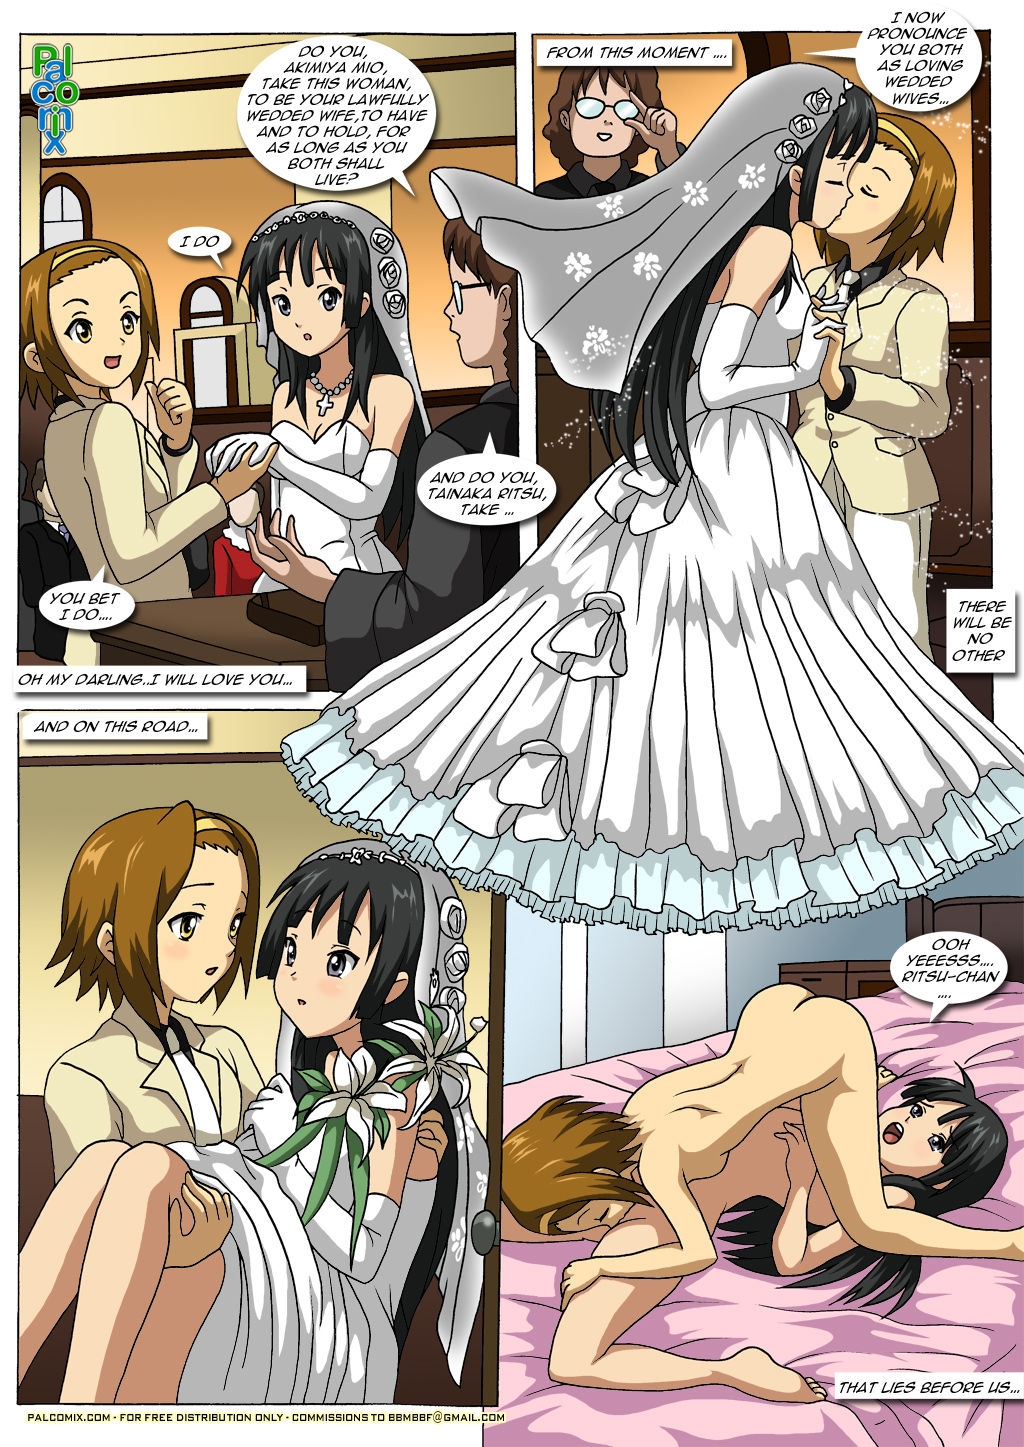 (Palcomix) On This Day... (K-ON!) 2